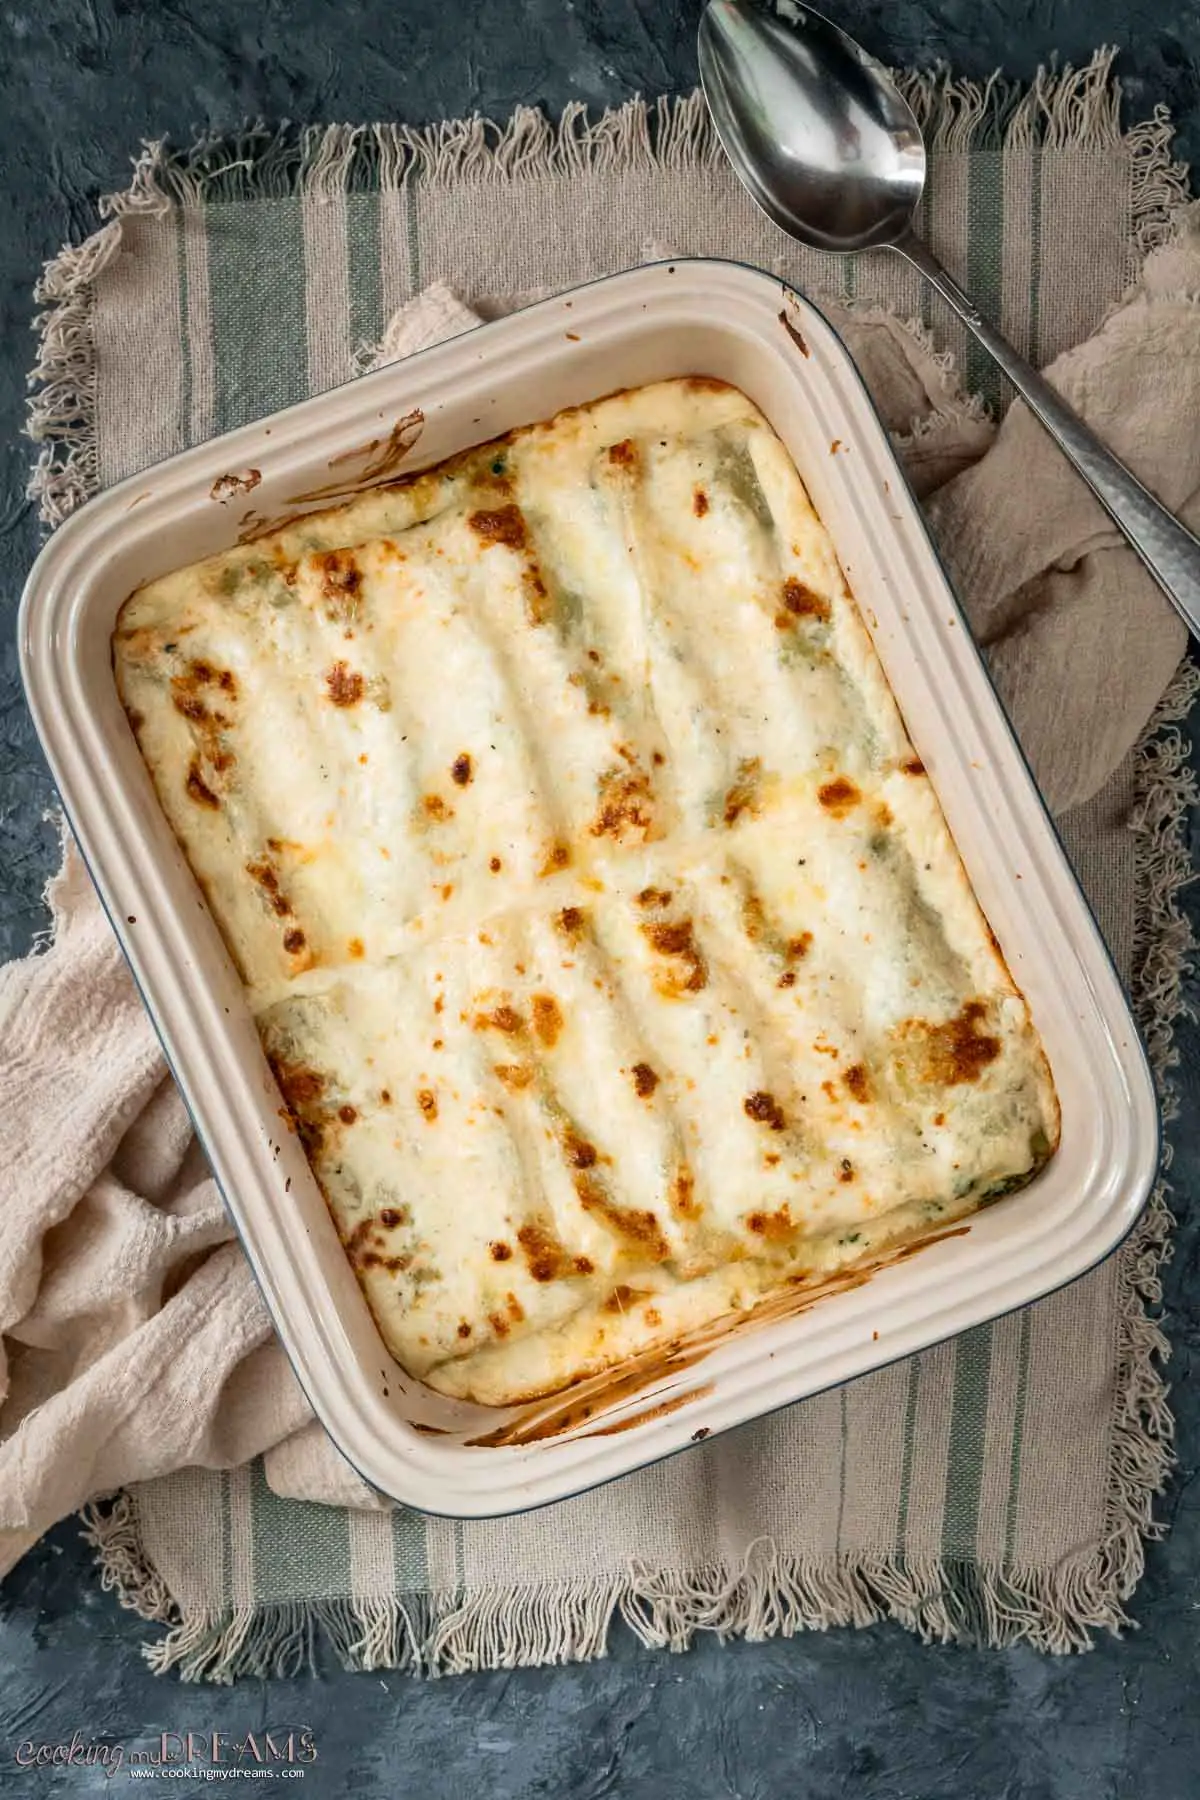 baked spinach ricotta cannelloni in a cheesy white sauce.